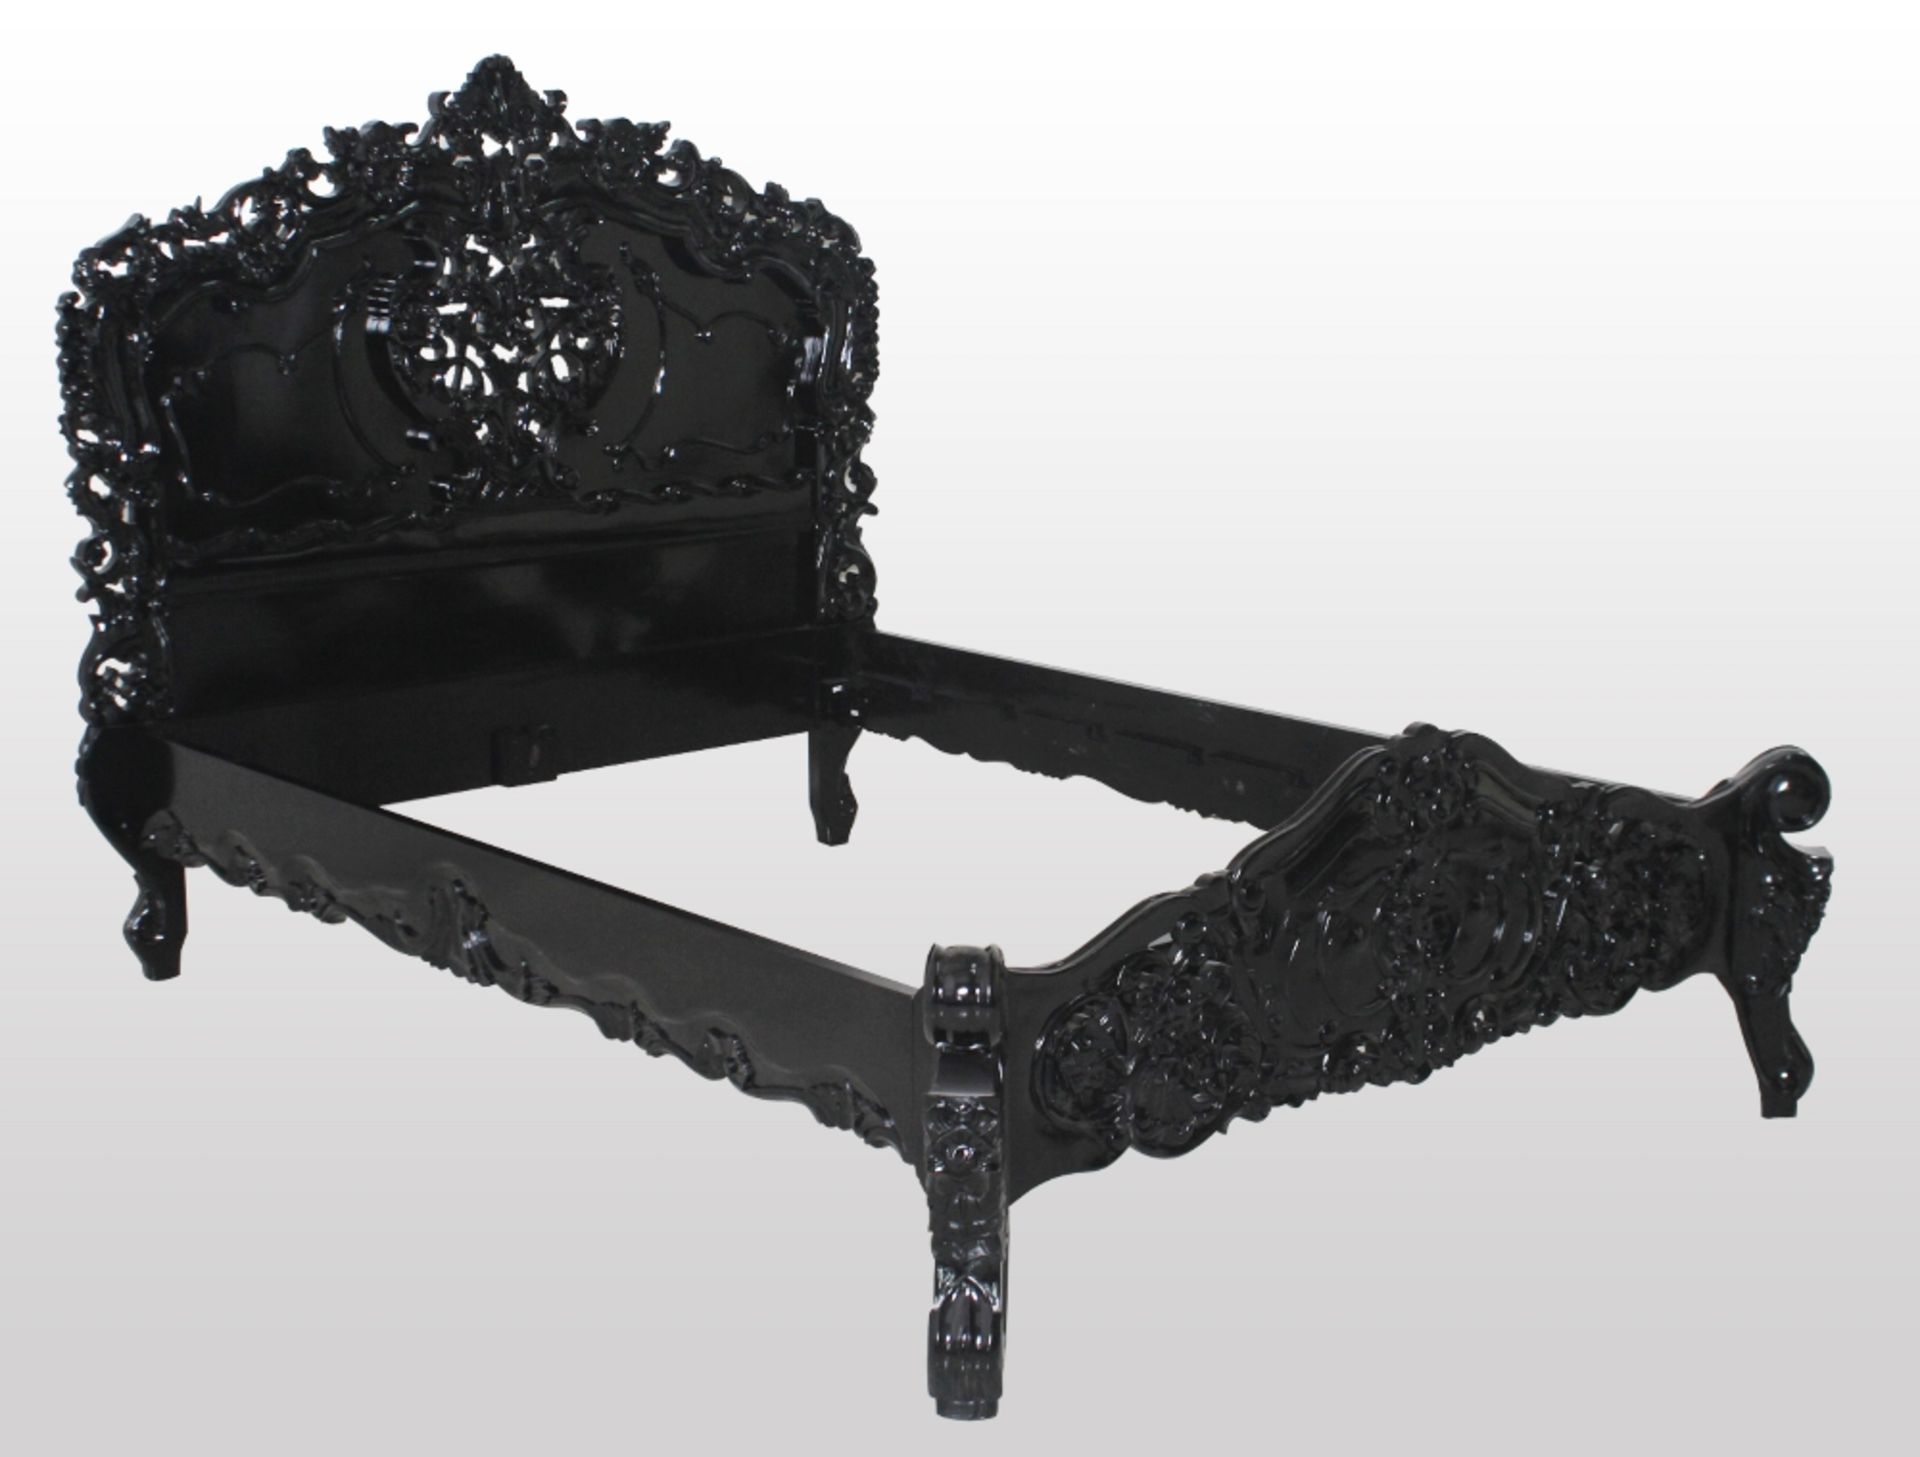 NEW PACKAGED BOUTIQUE HIGH QUALITY SOLID MAHOGANY ROCOCCO FRENCH CARVED SUPER KING SIZE BED IN BLACK